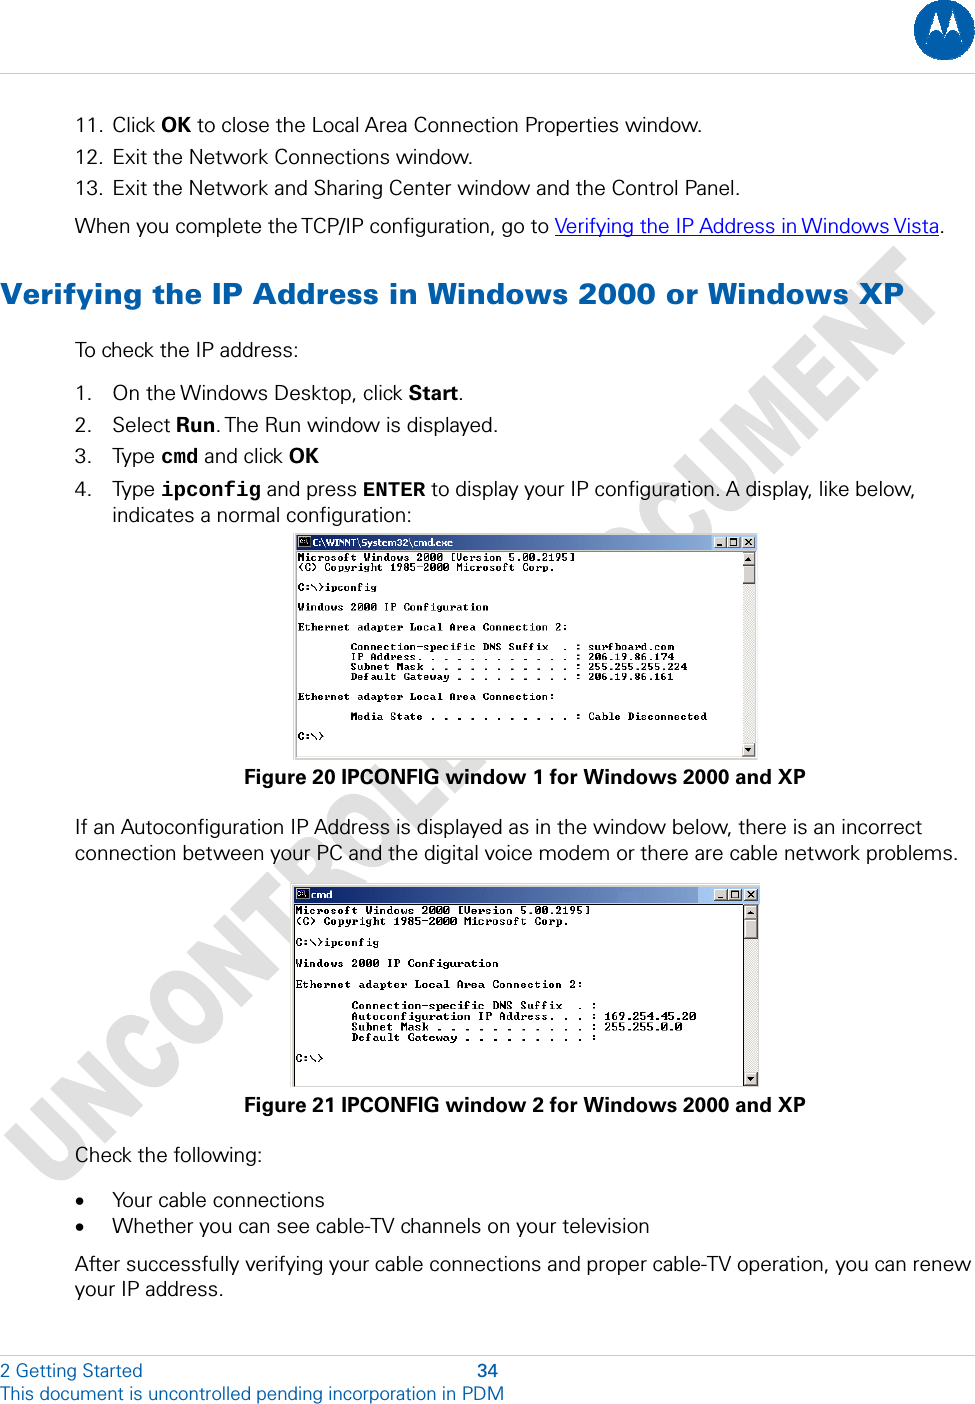  11. Click OK to close the Local Area Connection Properties window. 12. Exit the Network Connections window. 13. Exit the Network and Sharing Center window and the Control Panel. When you complete the TCP/IP configuration, go to Verifying the IP Address in Windows Vista. Verifying the IP Address in Windows 2000 or Windows XP To check the IP address: 1. On the Windows Desktop, click Start.  2. Select Run. The Run window is displayed. 3. Type cmd and click OK  4. Type ipconfig and press ENTER to display your IP configuration. A display, like below, indicates a normal configuration:  Figure 20 IPCONFIG window 1 for Windows 2000 and XP If an Autoconfiguration IP Address is displayed as in the window below, there is an incorrect connection between your PC and the digital voice modem or there are cable network problems.   Figure 21 IPCONFIG window 2 for Windows 2000 and XP Check the following: • Your cable connections • Whether you can see cable-TV channels on your television After successfully verifying your cable connections and proper cable-TV operation, you can renew your IP address. 2 Getting Started  34 This document is uncontrolled pending incorporation in PDM  